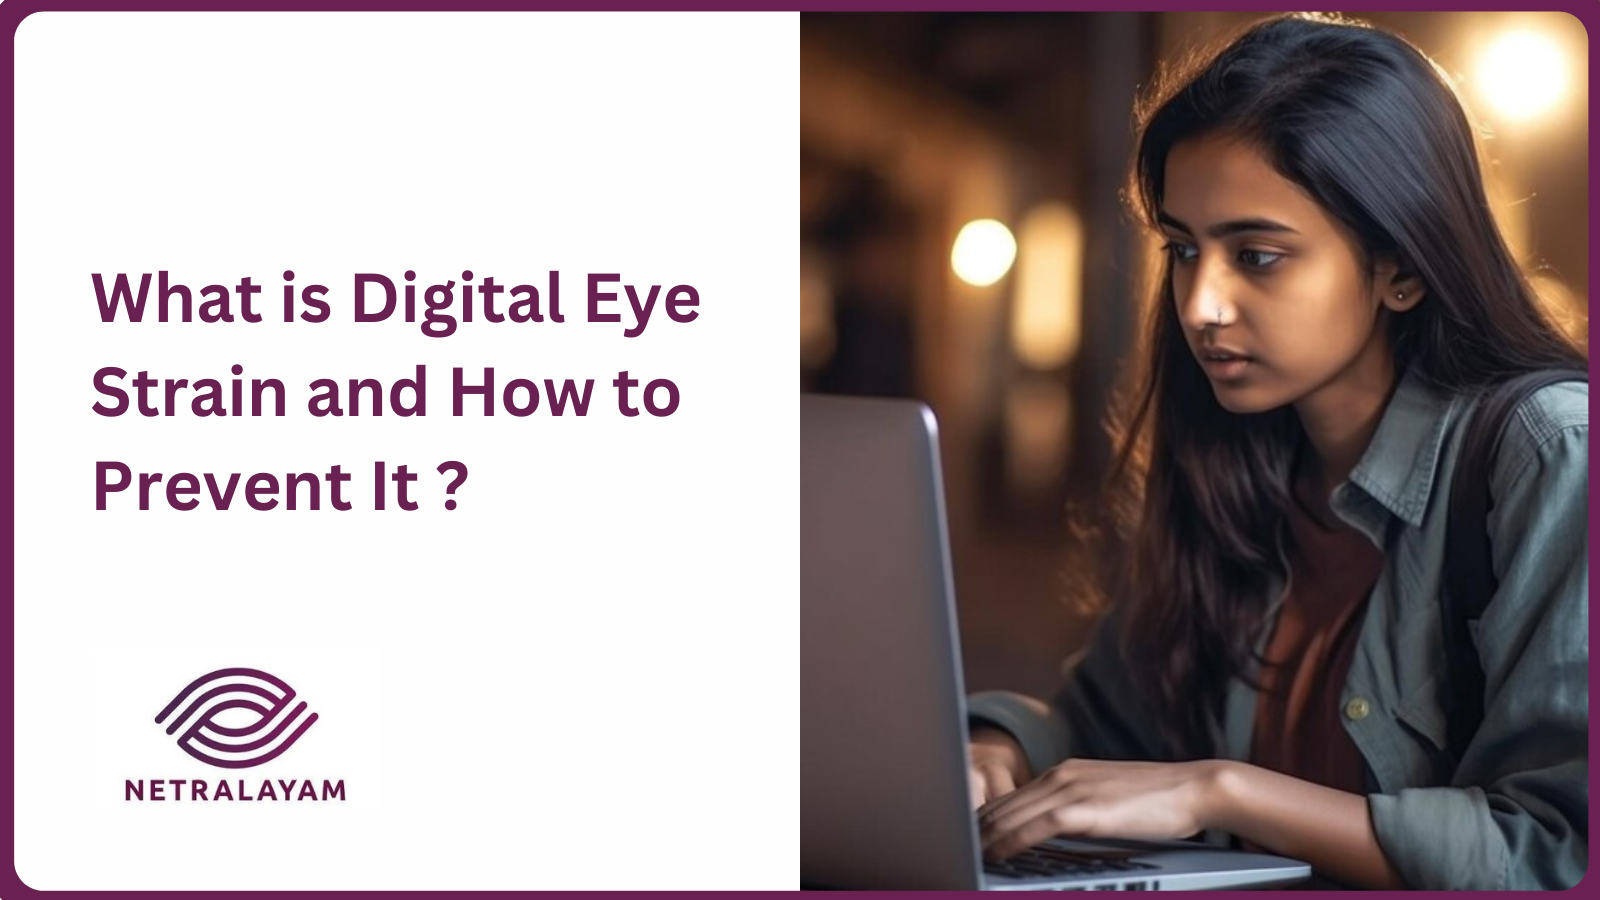 What is Digital Eye Strain and How to Prevent It?